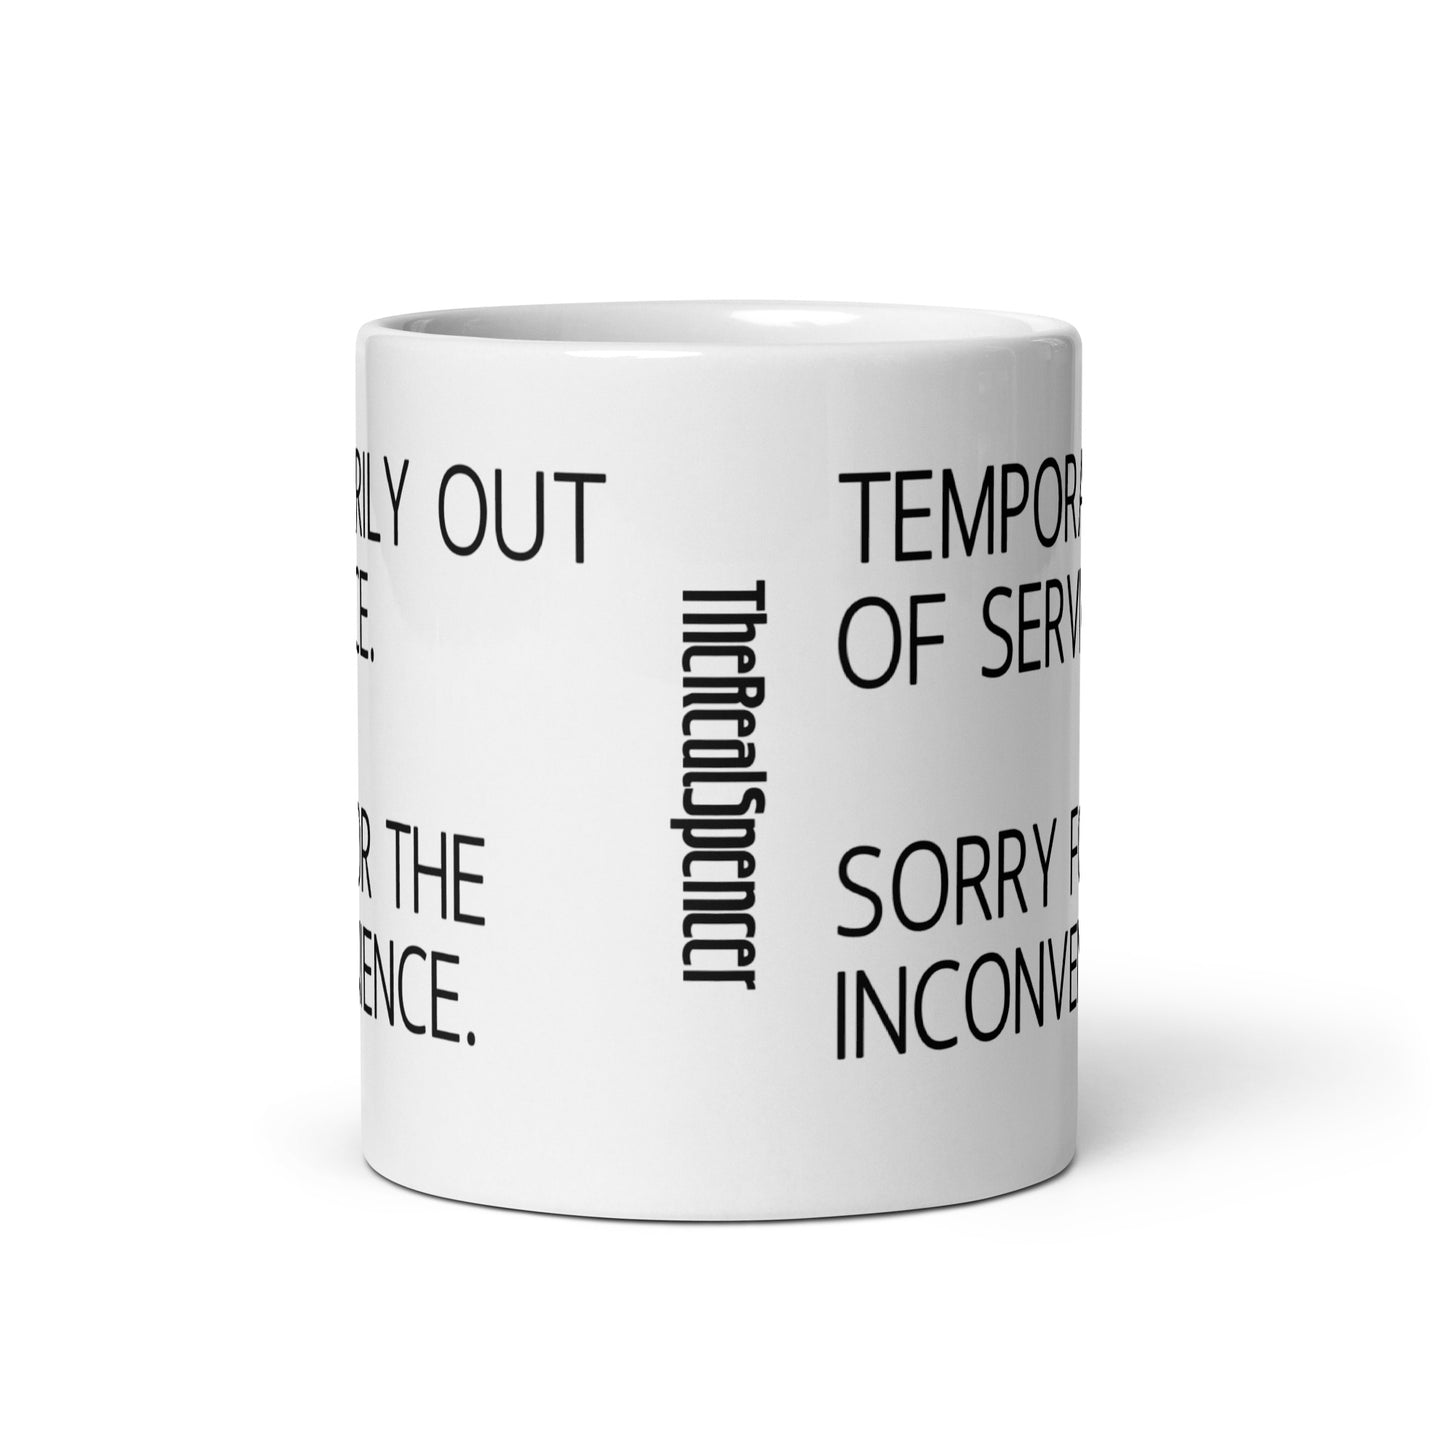 Temporarily Out Of Service Mug